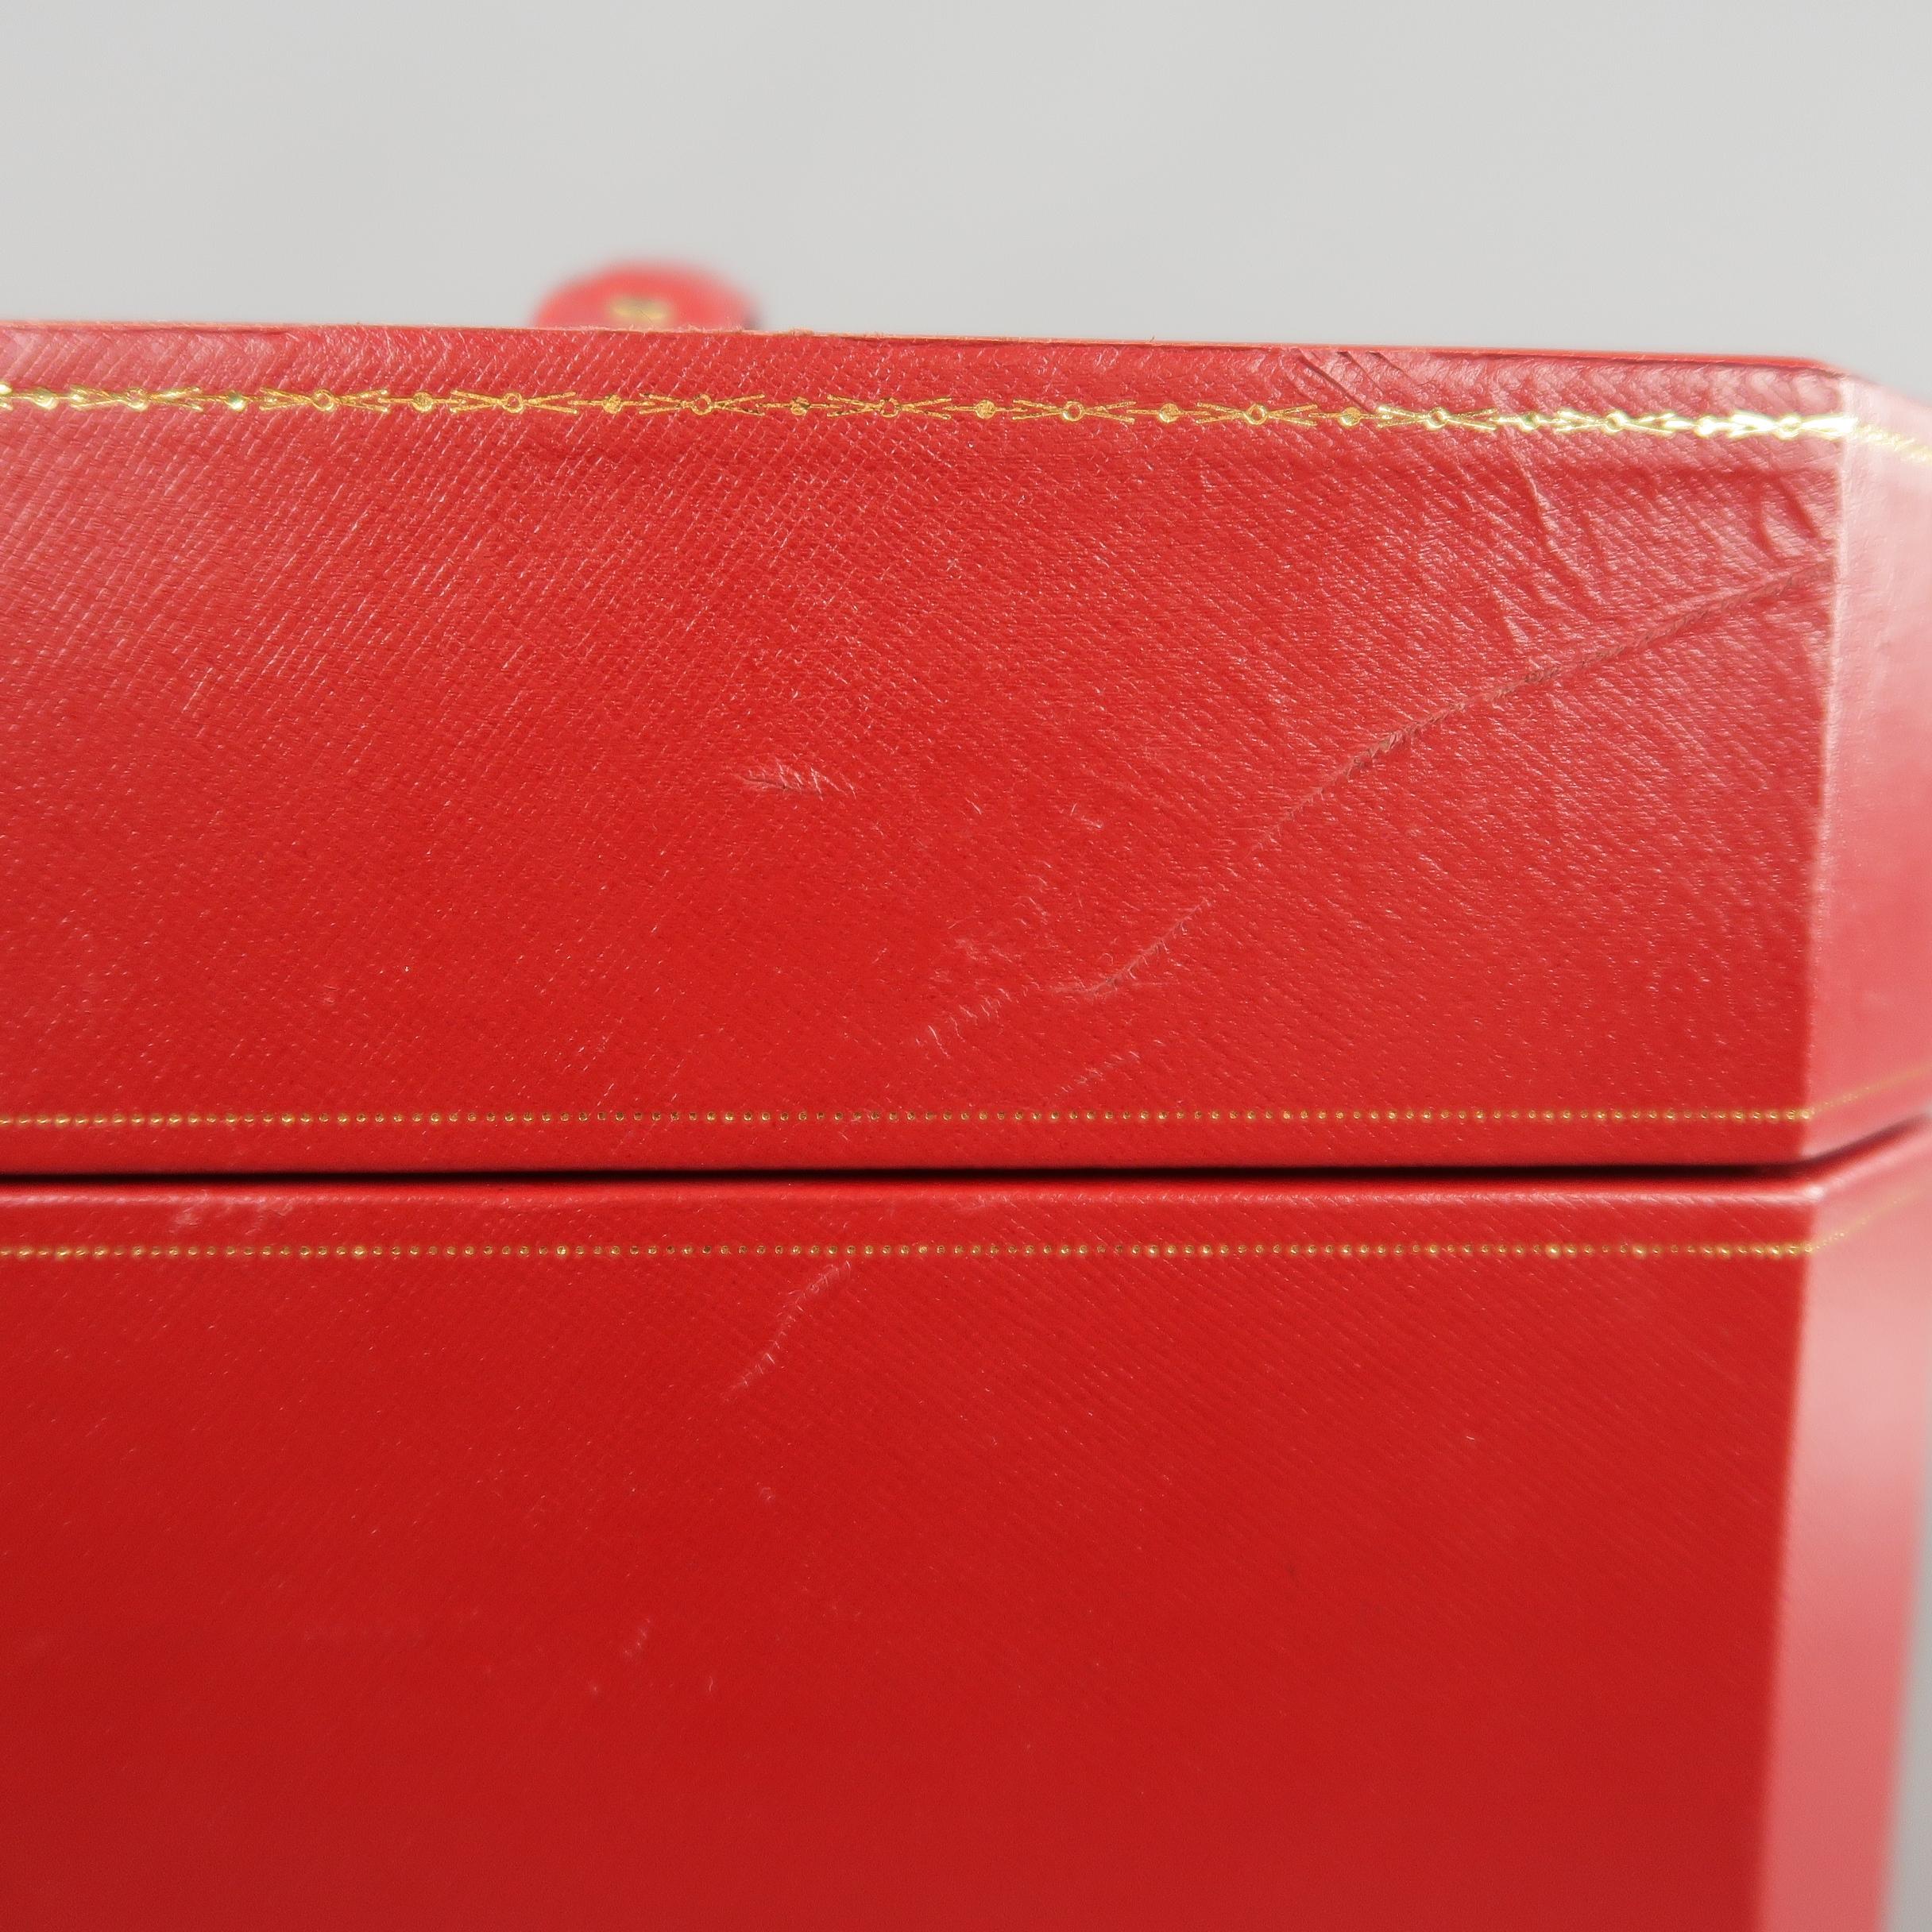 Vintage CARTIER Red Watch & Jewelry Storage Box with Drawer Compartments 4